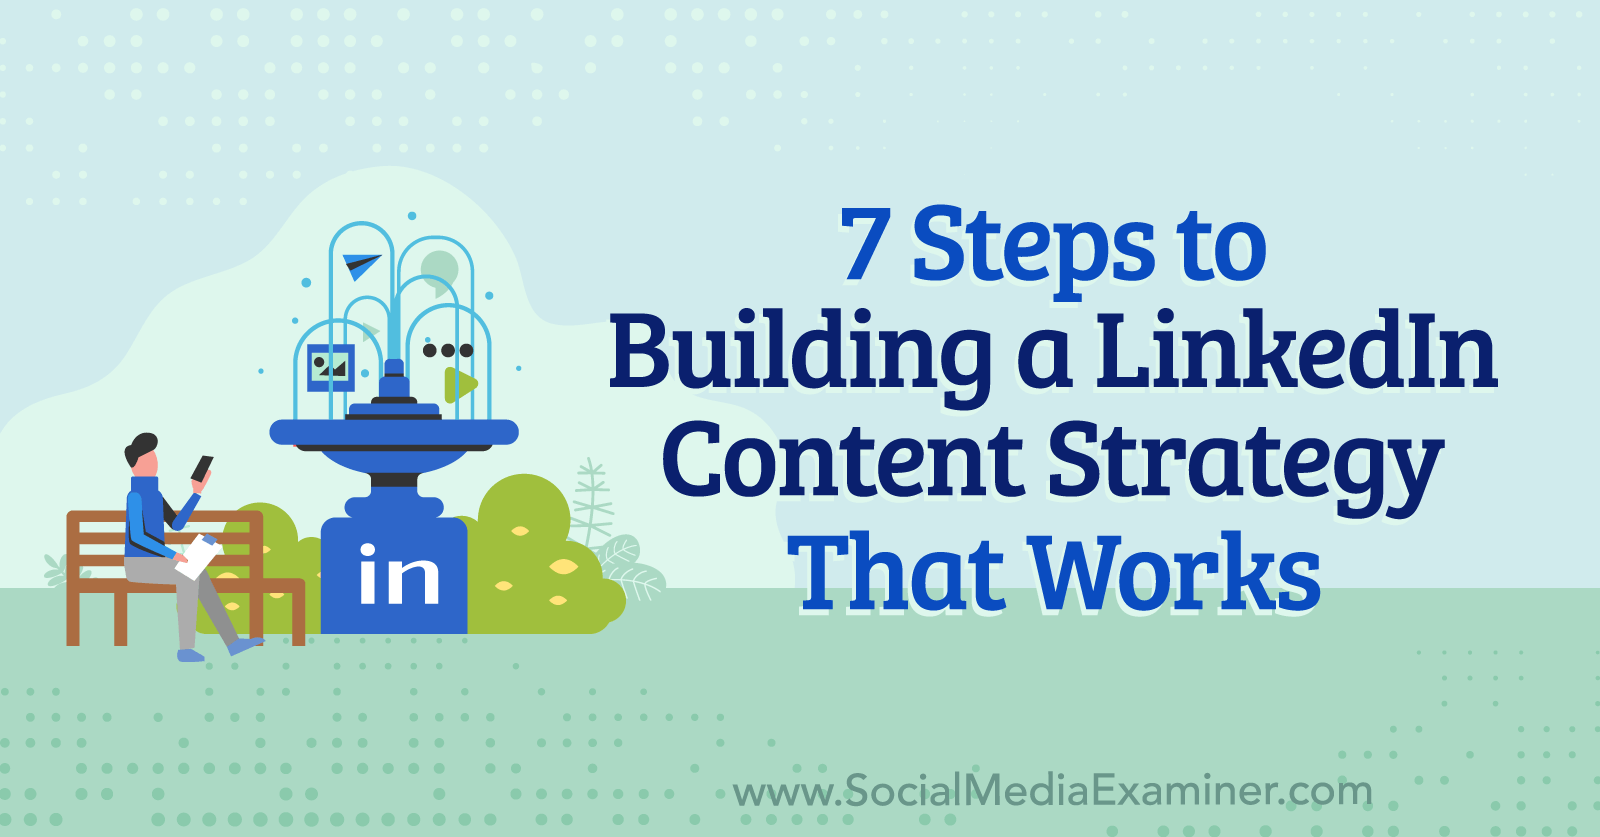 7 Steps to Building a LinkedIn Content Strategy That Works by Anna Sonnenberg